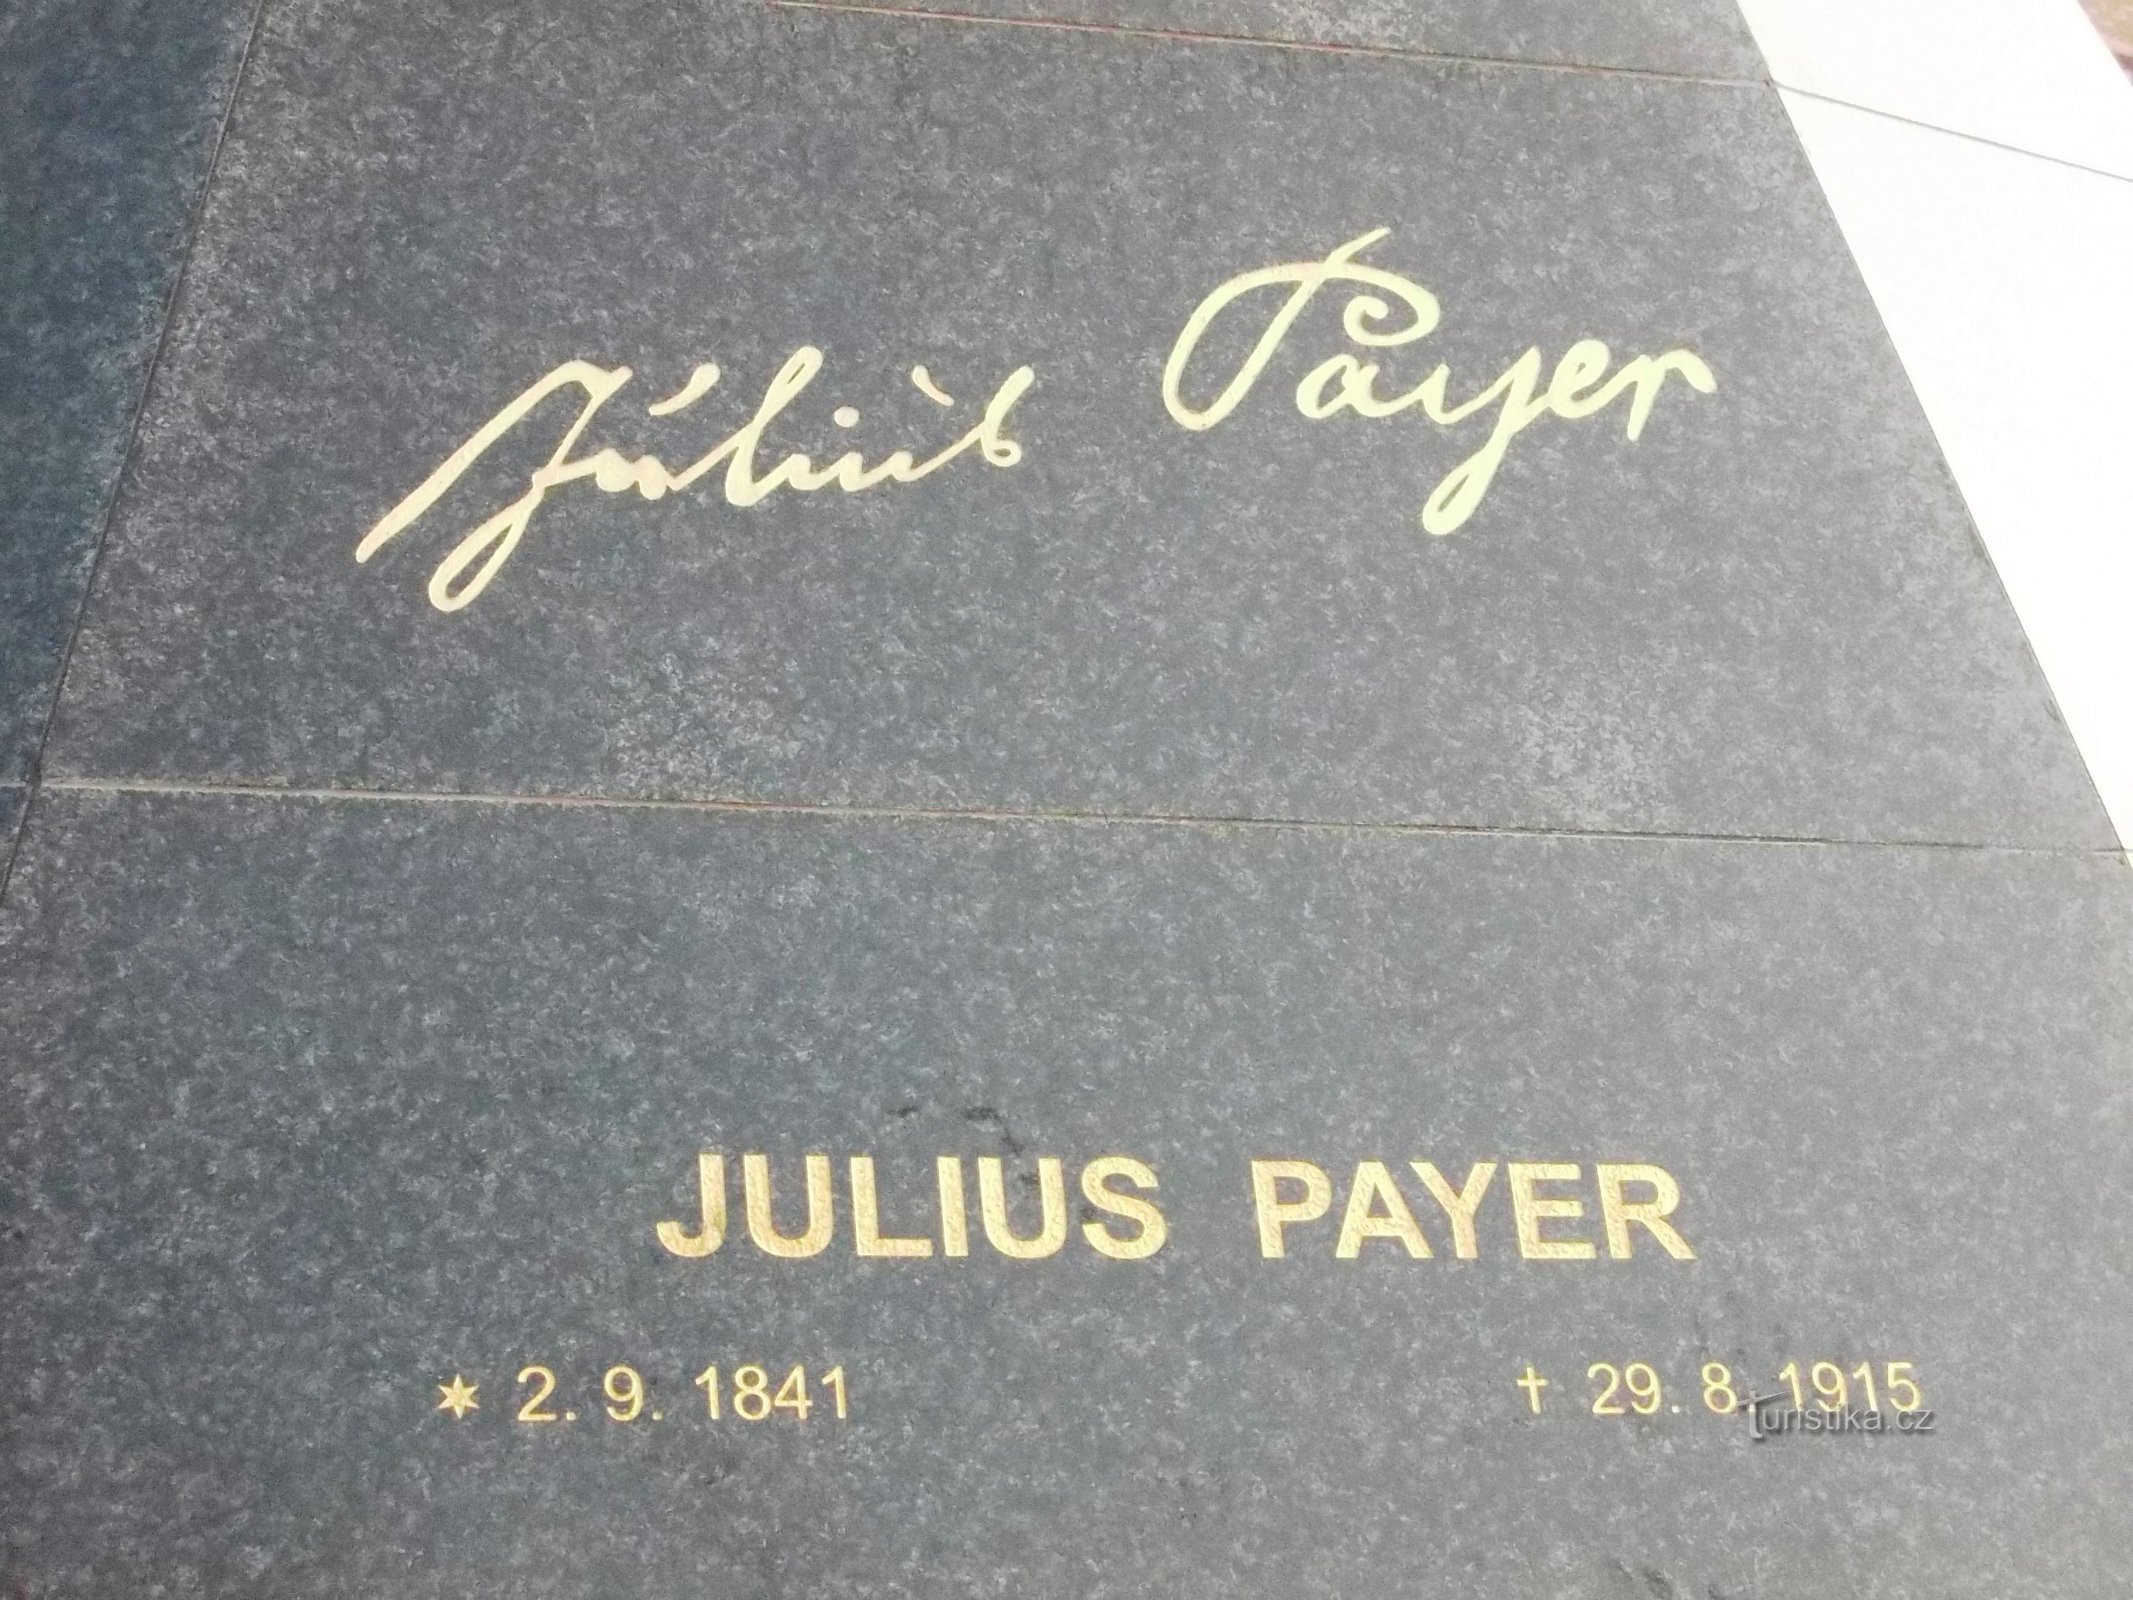 Julius Payer lived in the years 1841 - 1915